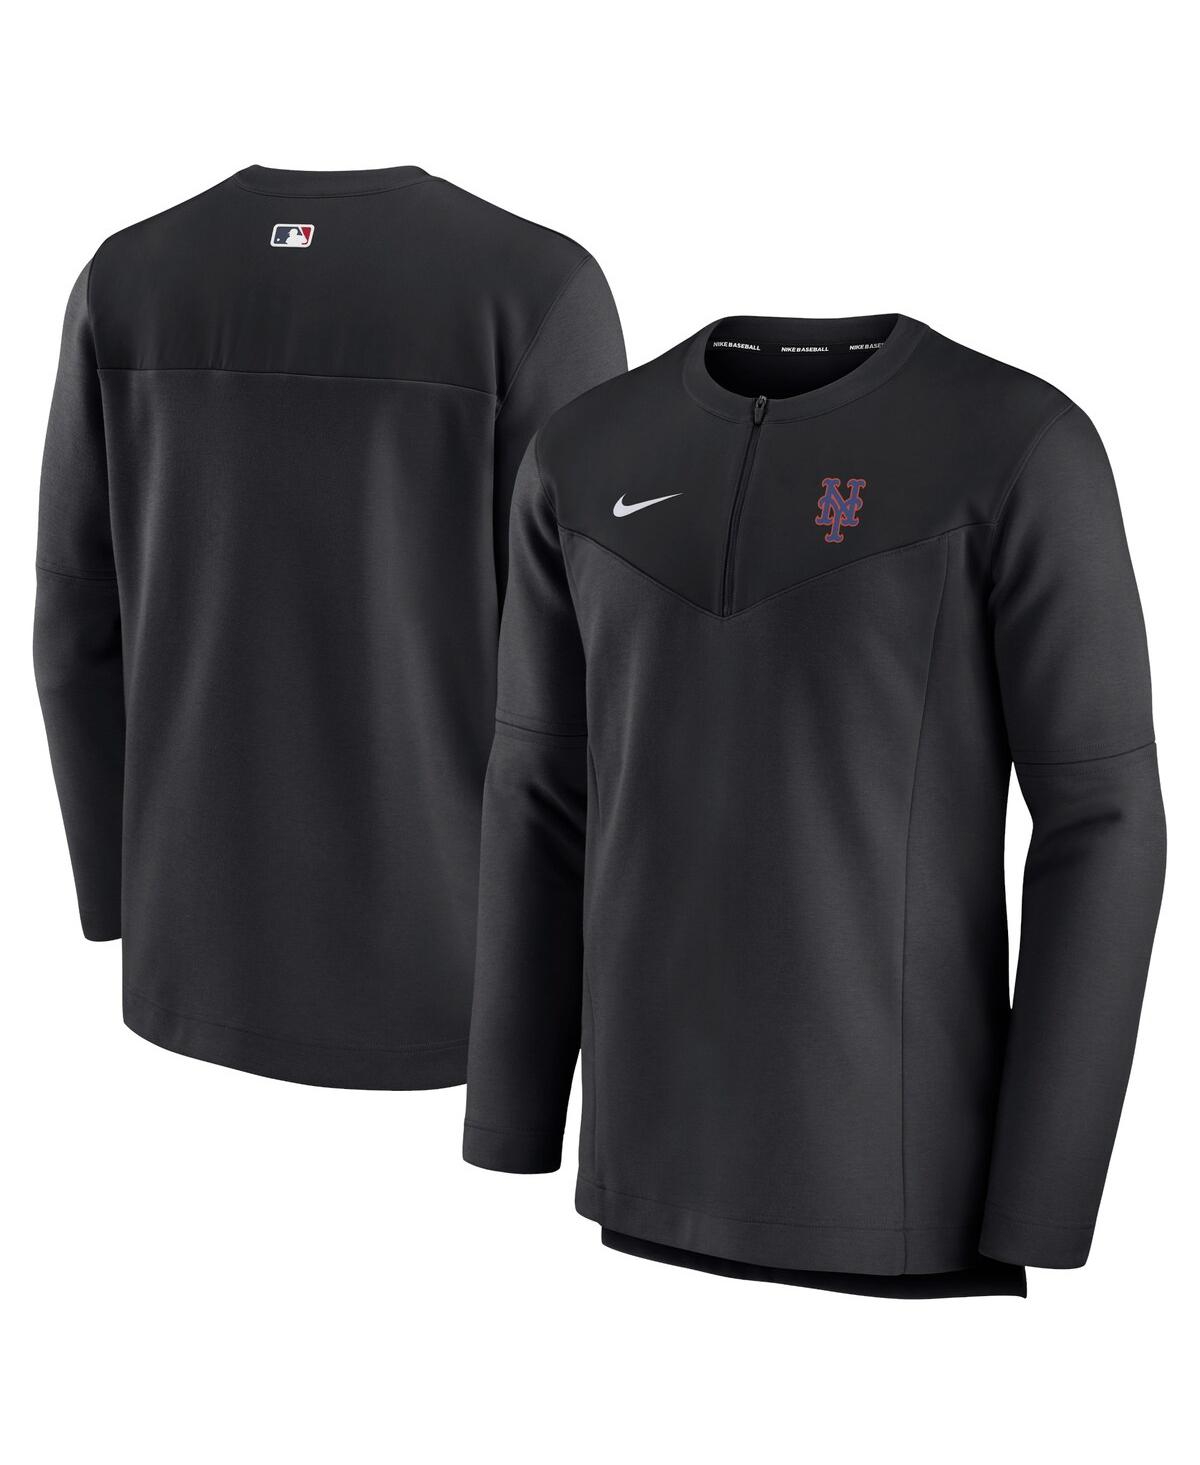 Men's Nike Navy New York Yankees Authentic Collection Game Time Performance Half-Zip Top Black